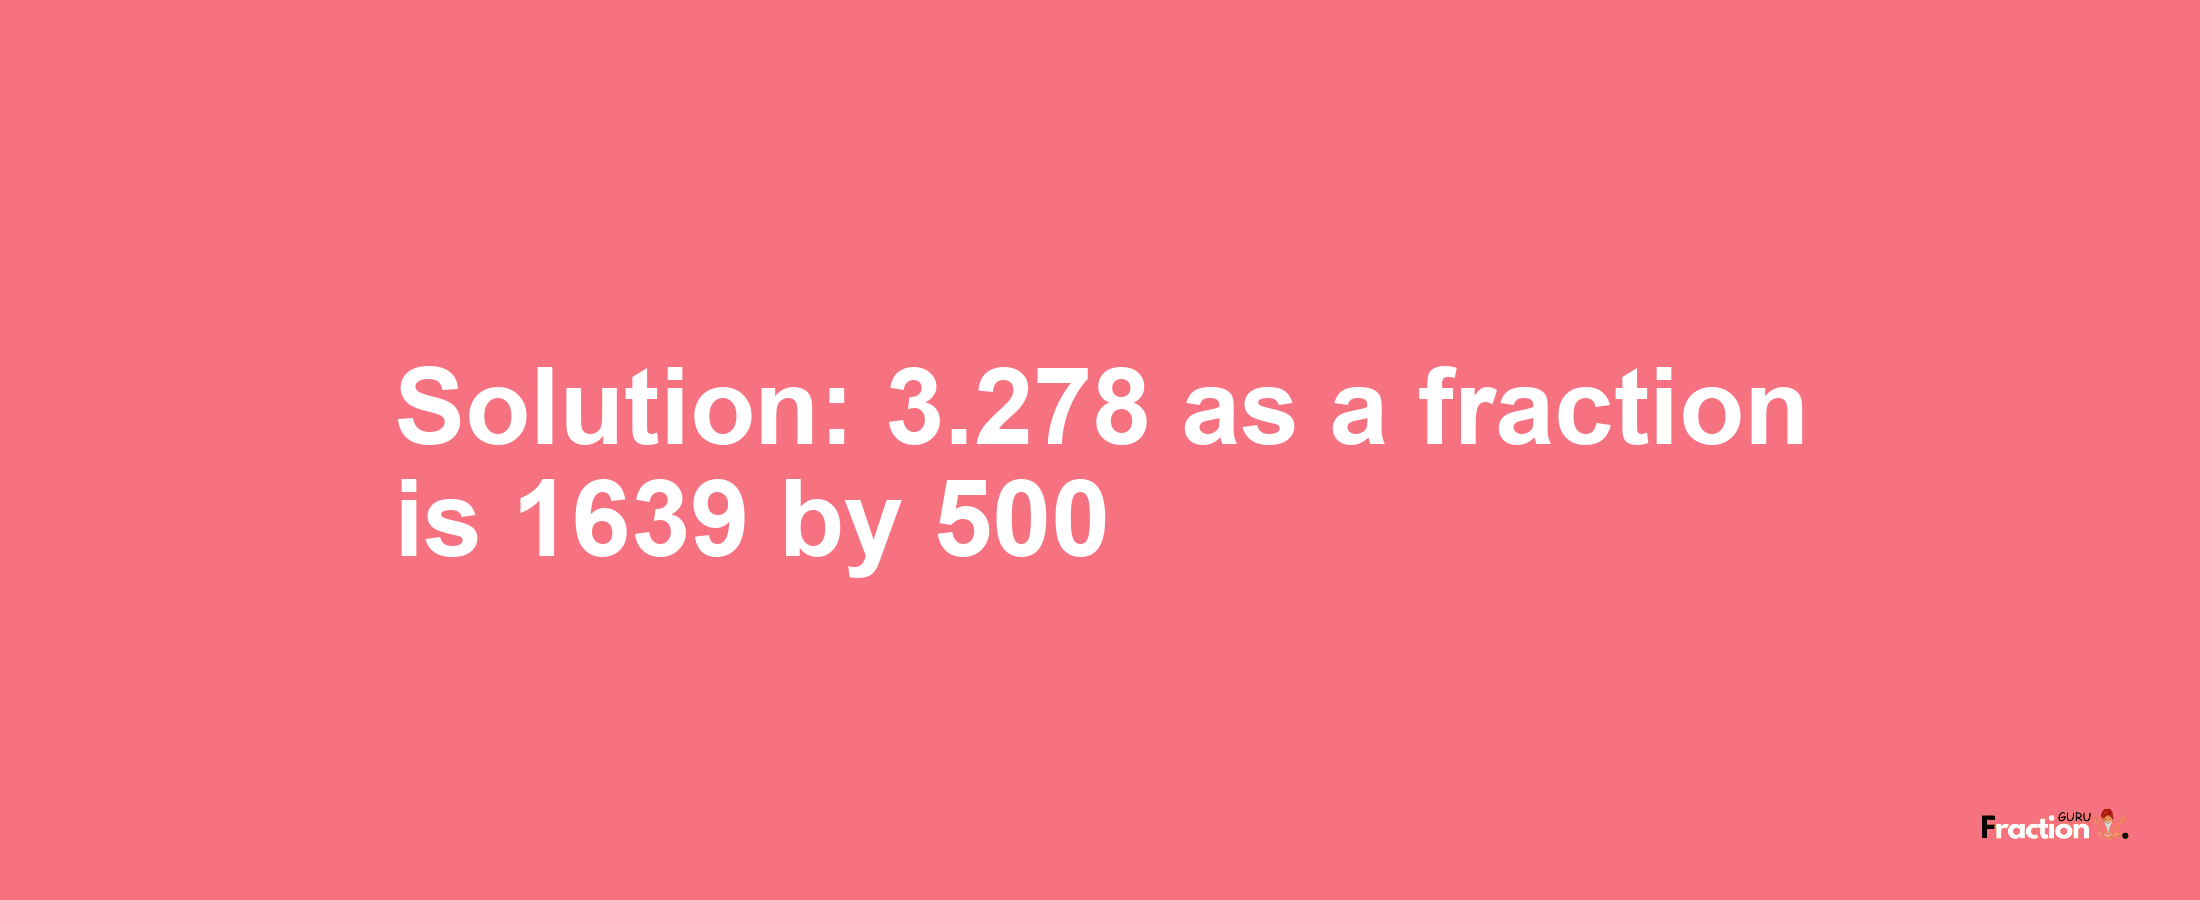 Solution:3.278 as a fraction is 1639/500